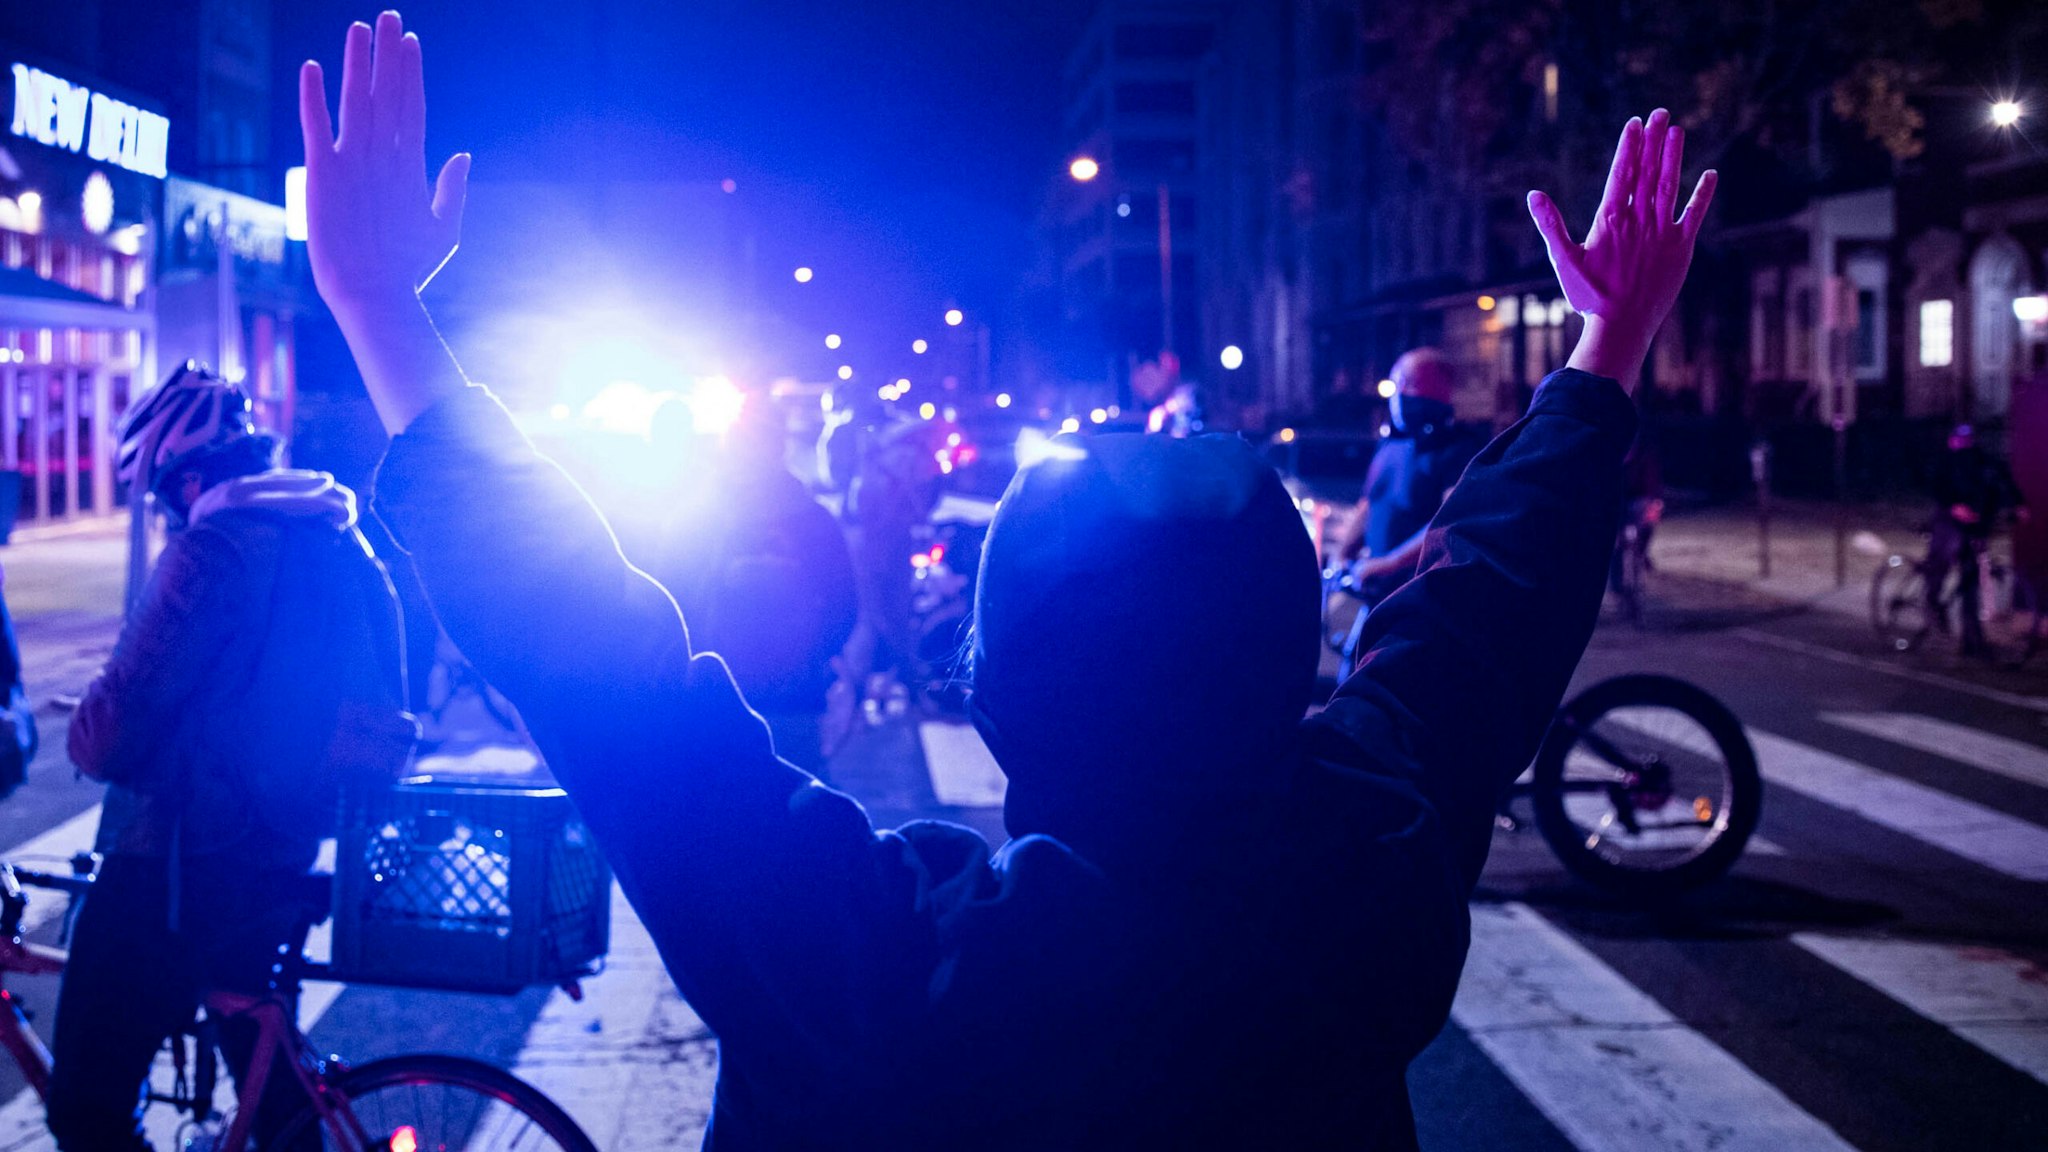 A protester raises their hands in West Philadelphia on October 27, 2020, during a demonstration against the fatal shooting of 27-year-old Walter Wallace, a Black man, by police. - Hundreds of people demonstrated in Philadelphia late on October 27, with looting and violence breaking out in a second night of unrest after the latest police shooting of a Black man in the US. The fresh unrest came a day after the death of 27-year-old Walter Wallace, whose family said he suffered mental health issues. On Monday night hundreds of demonstrators took to the streets, with riot police pushing them back with shields and batons.